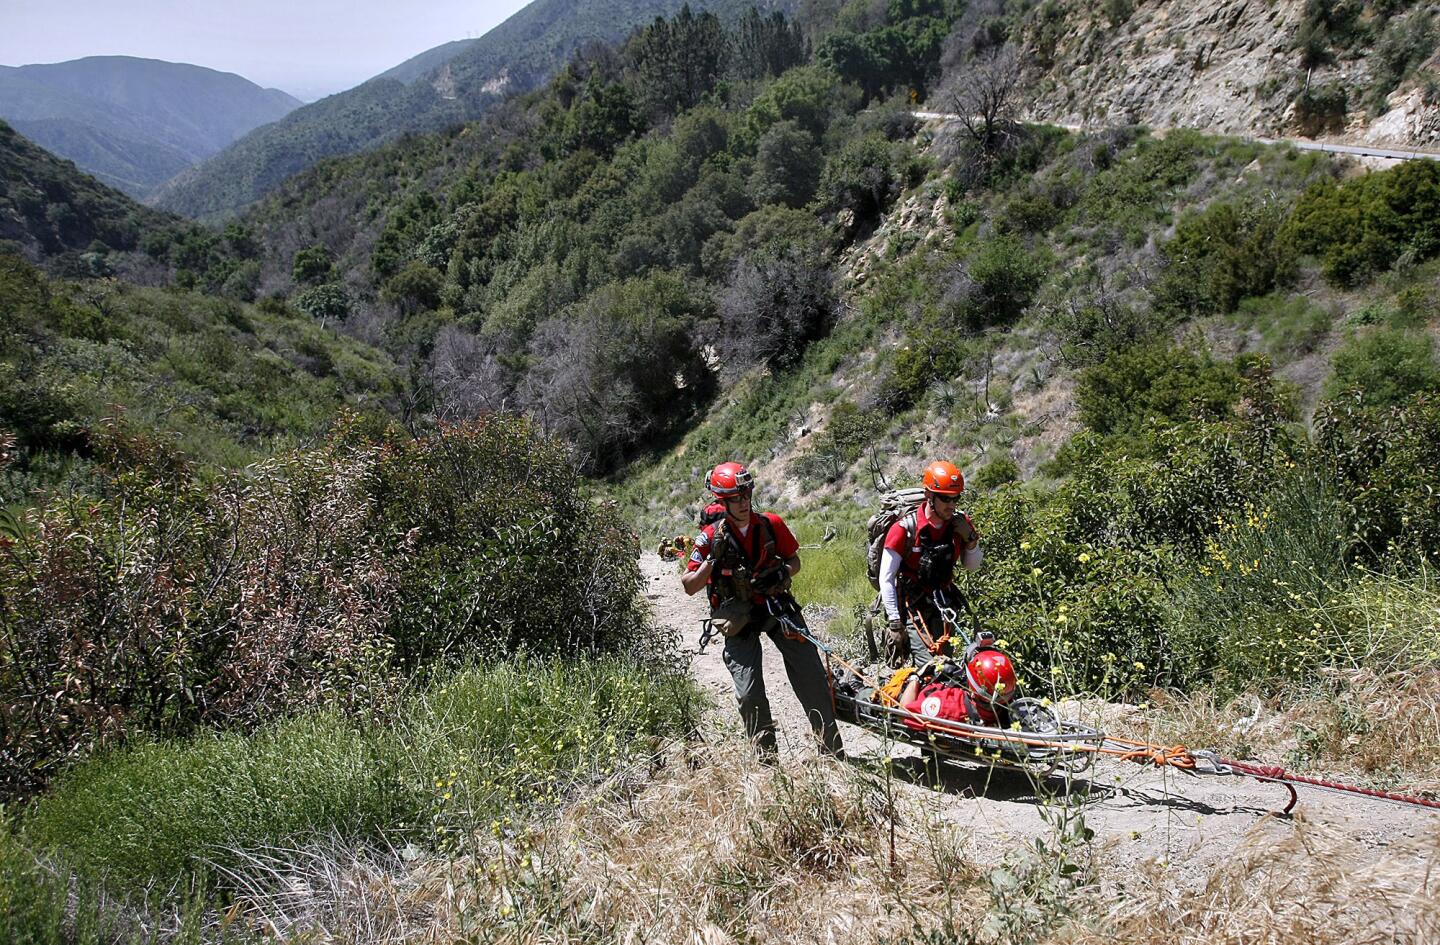 Members of the Altadena Mountain Rescue Team bring up a "victim" during multi-agency "over-the-side" high angle, technical rescue exercise on Angeles Crest Highway in the Angeles National Forest on Friday, April 26, 2013. About 100 personnel from different local agencies participated, including some from the L.A. Co. Sheriff Montrose Search & Rescue Team, Altadena MRT, L.A. County Fire Depts. from La Canada Flintridge and Pico Rivera along with Air Rescue 5, and the U.S. Forest Service.